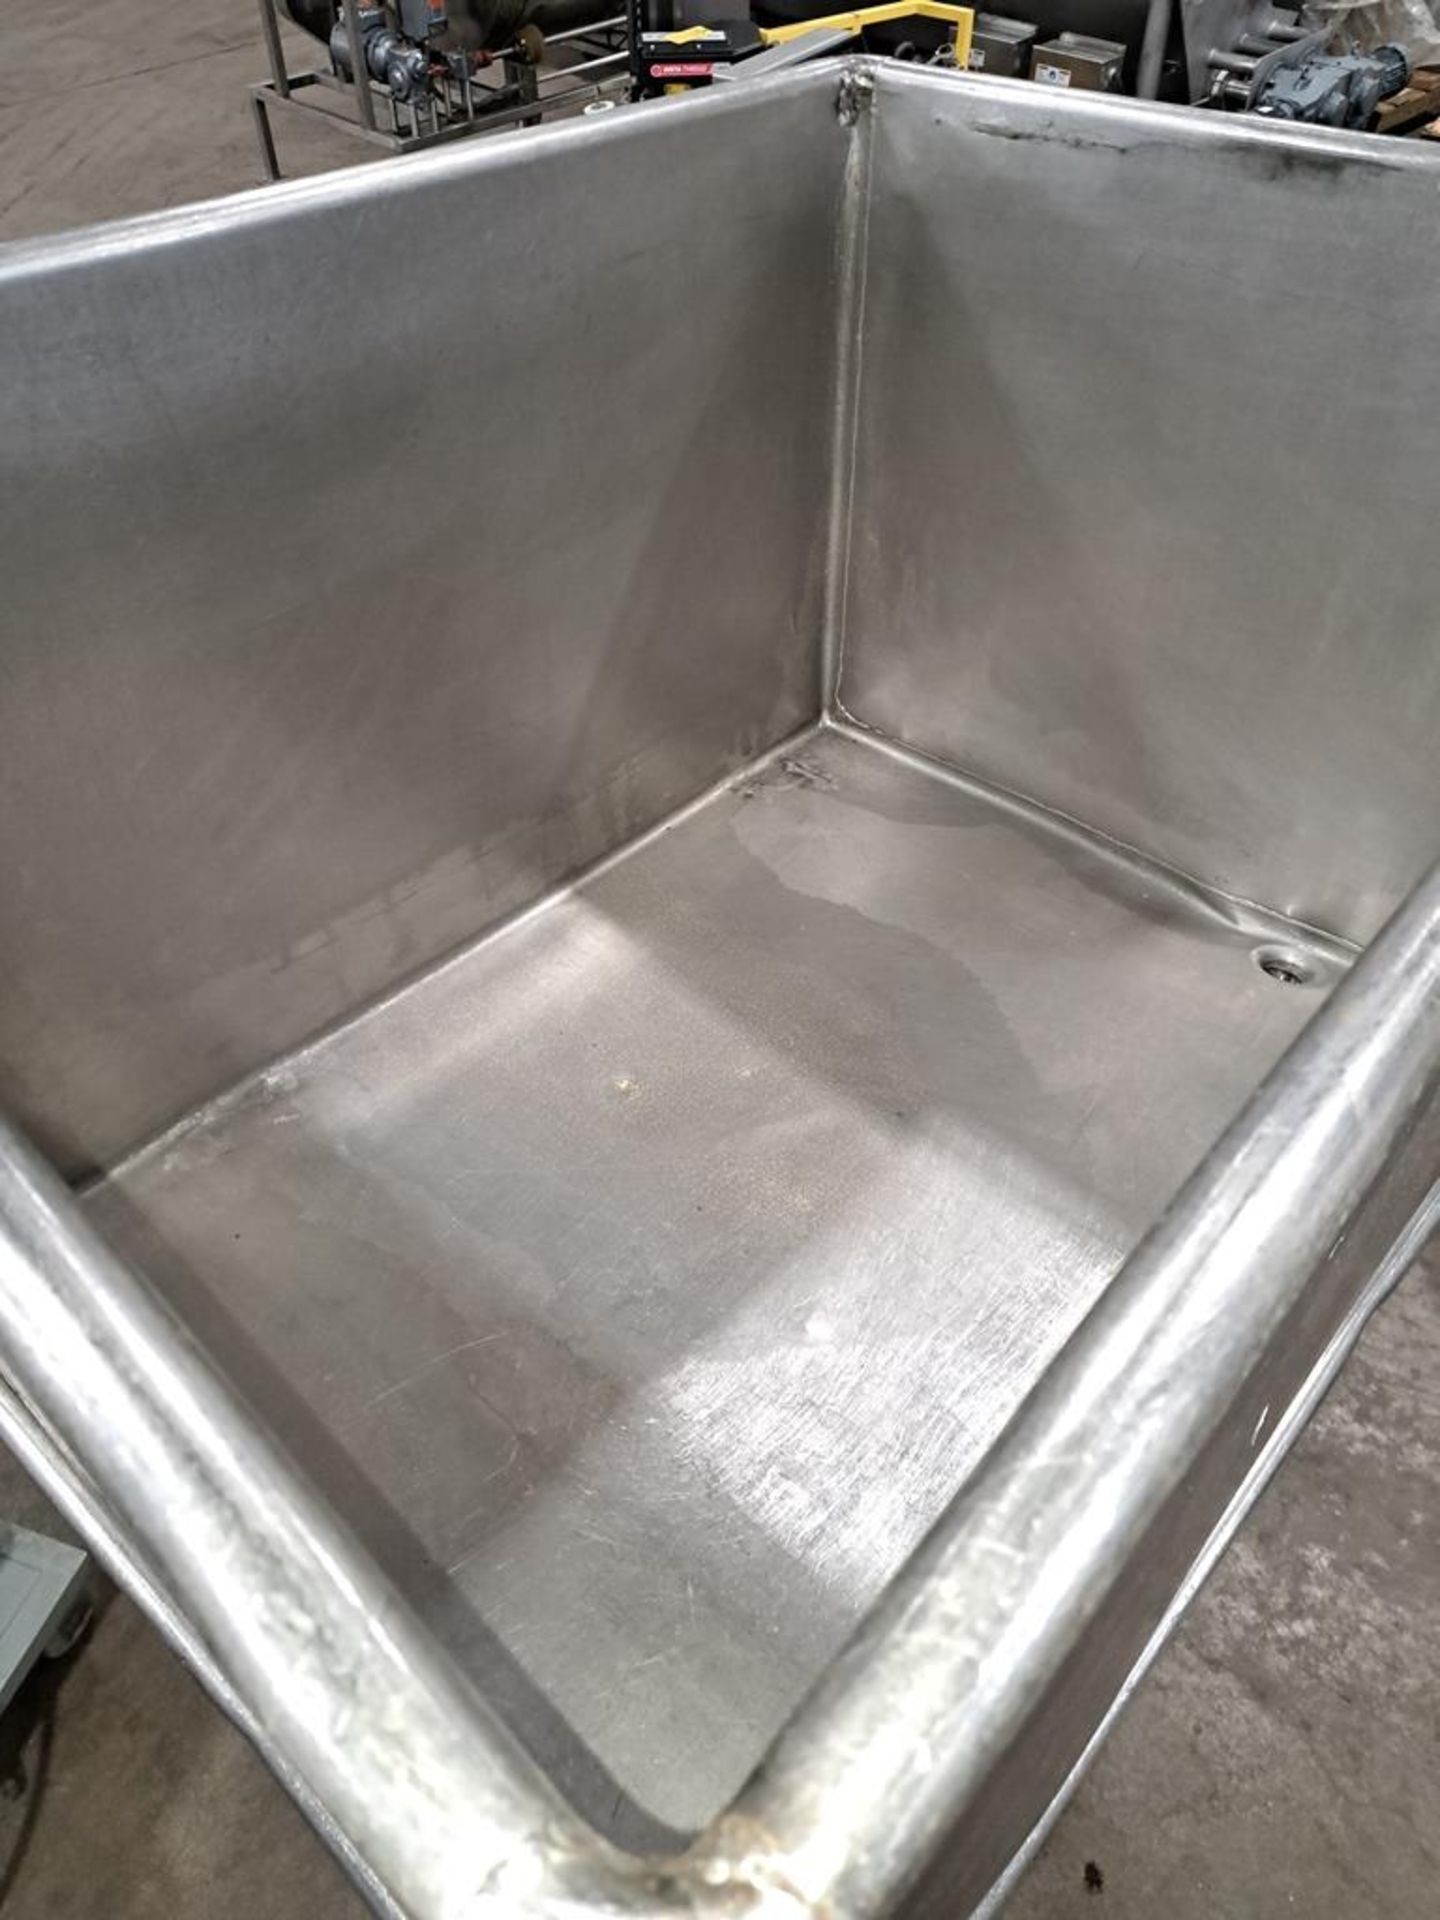 Stainless Steel Portable Vat, 3' wide X 4' long X 28" deep (Located in Plano, IL) - Image 2 of 2